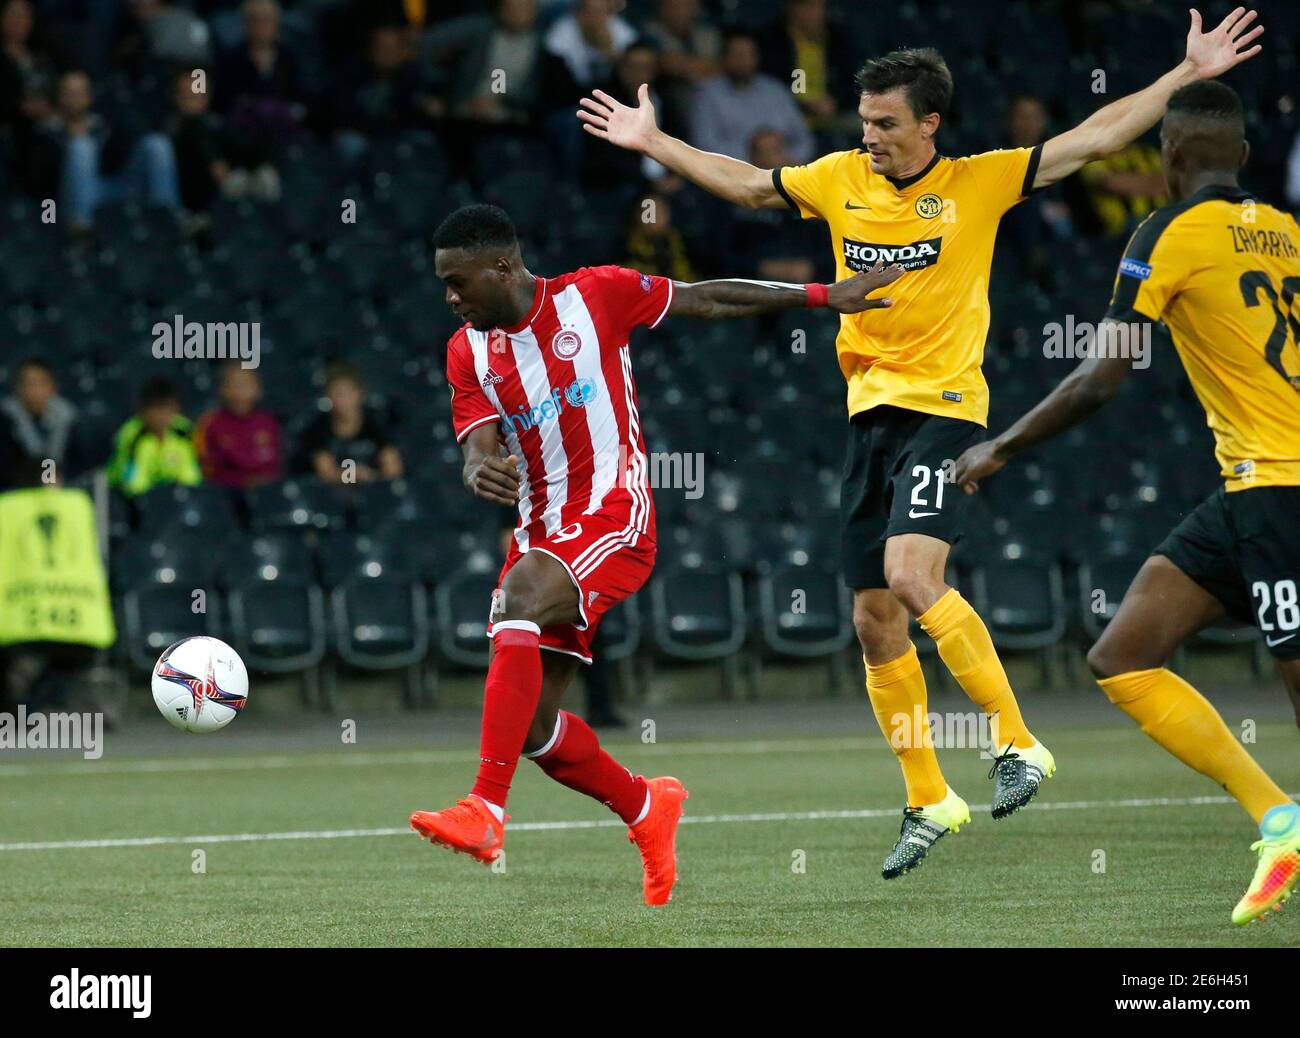 Football Soccer - BSC Young Boys v Olympiacos - UEFA Europa League group  stage - Stade de Suisse, Bern, Switzerland - 15/09/16 Olympiacos' Brown  Ideye fights for the ball with BSC Young